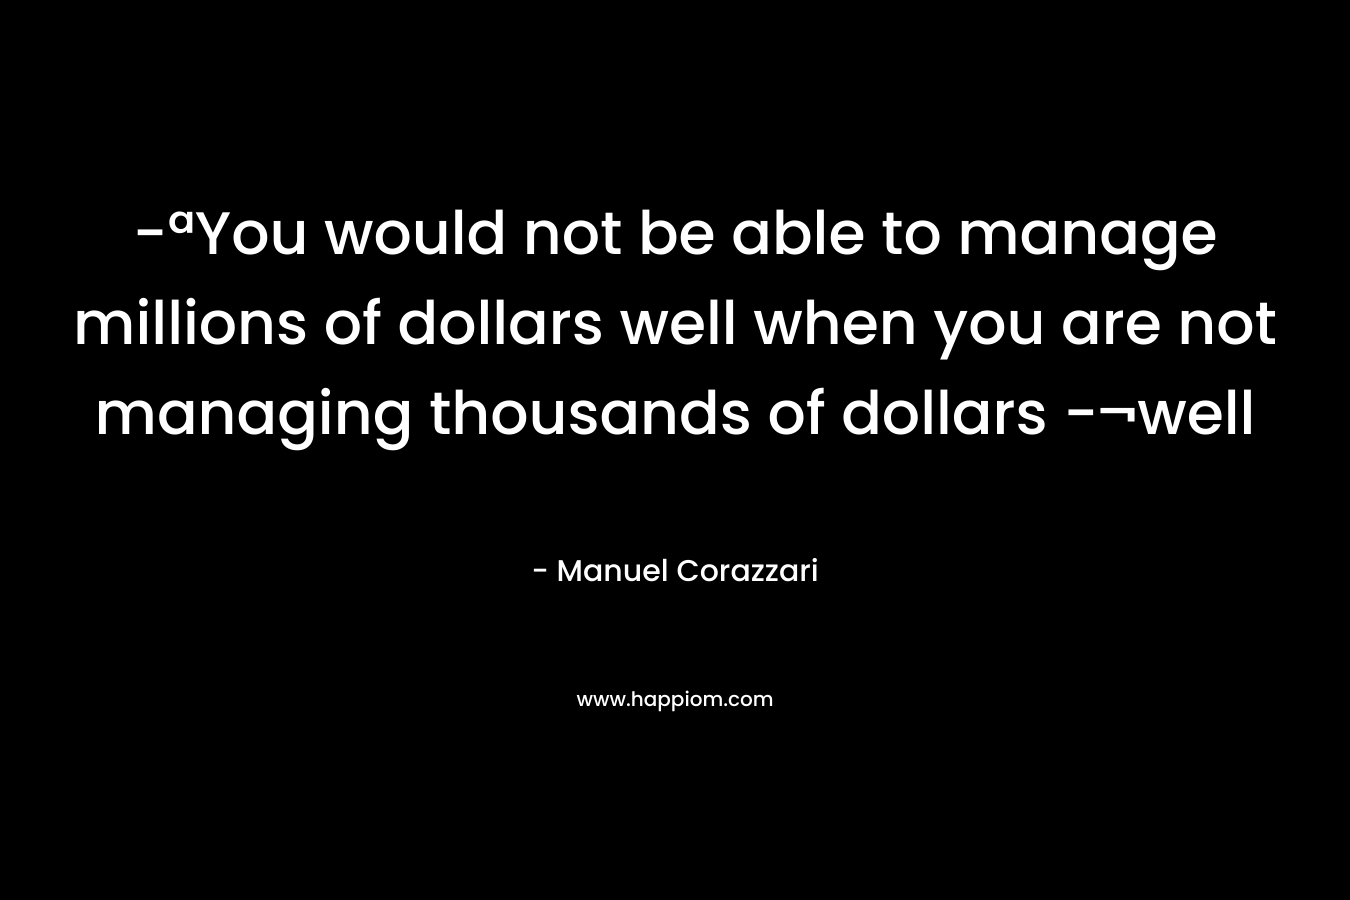 -ªYou would not be able to manage millions of dollars well when you are not managing thousands of dollars -¬well